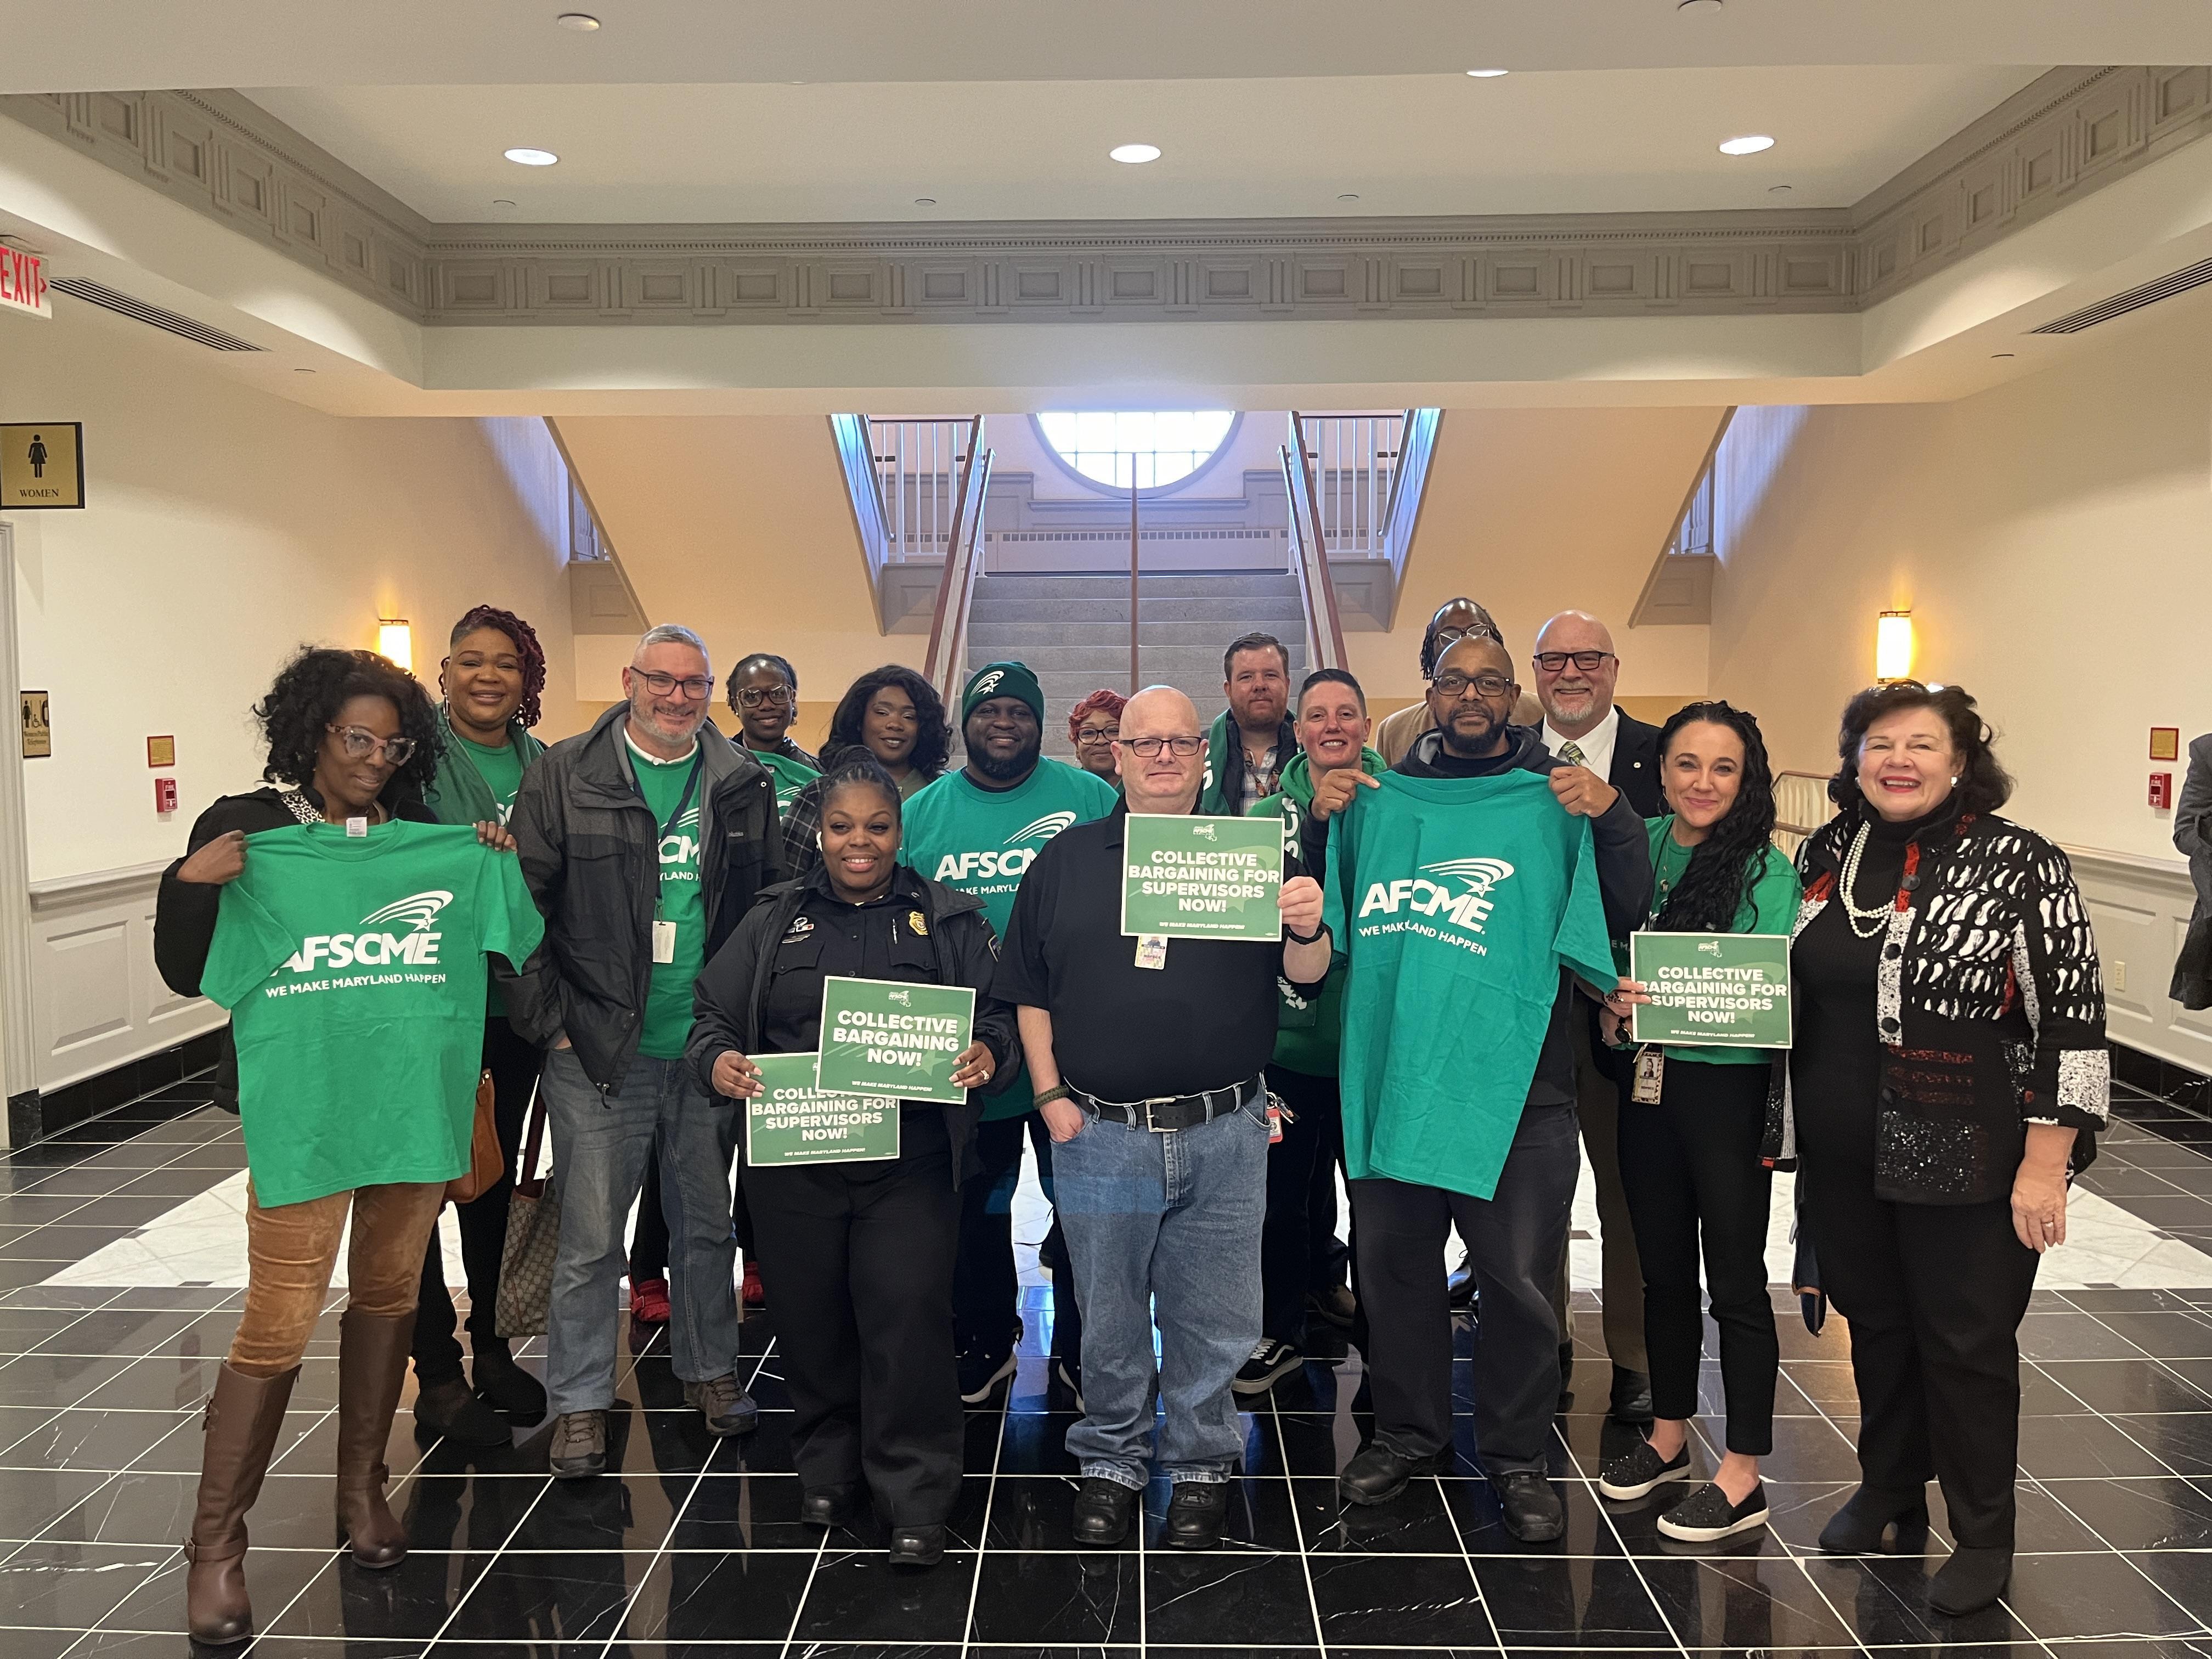 AFSCME supervisor members advocating for collective bargaining legislation in Annapolis